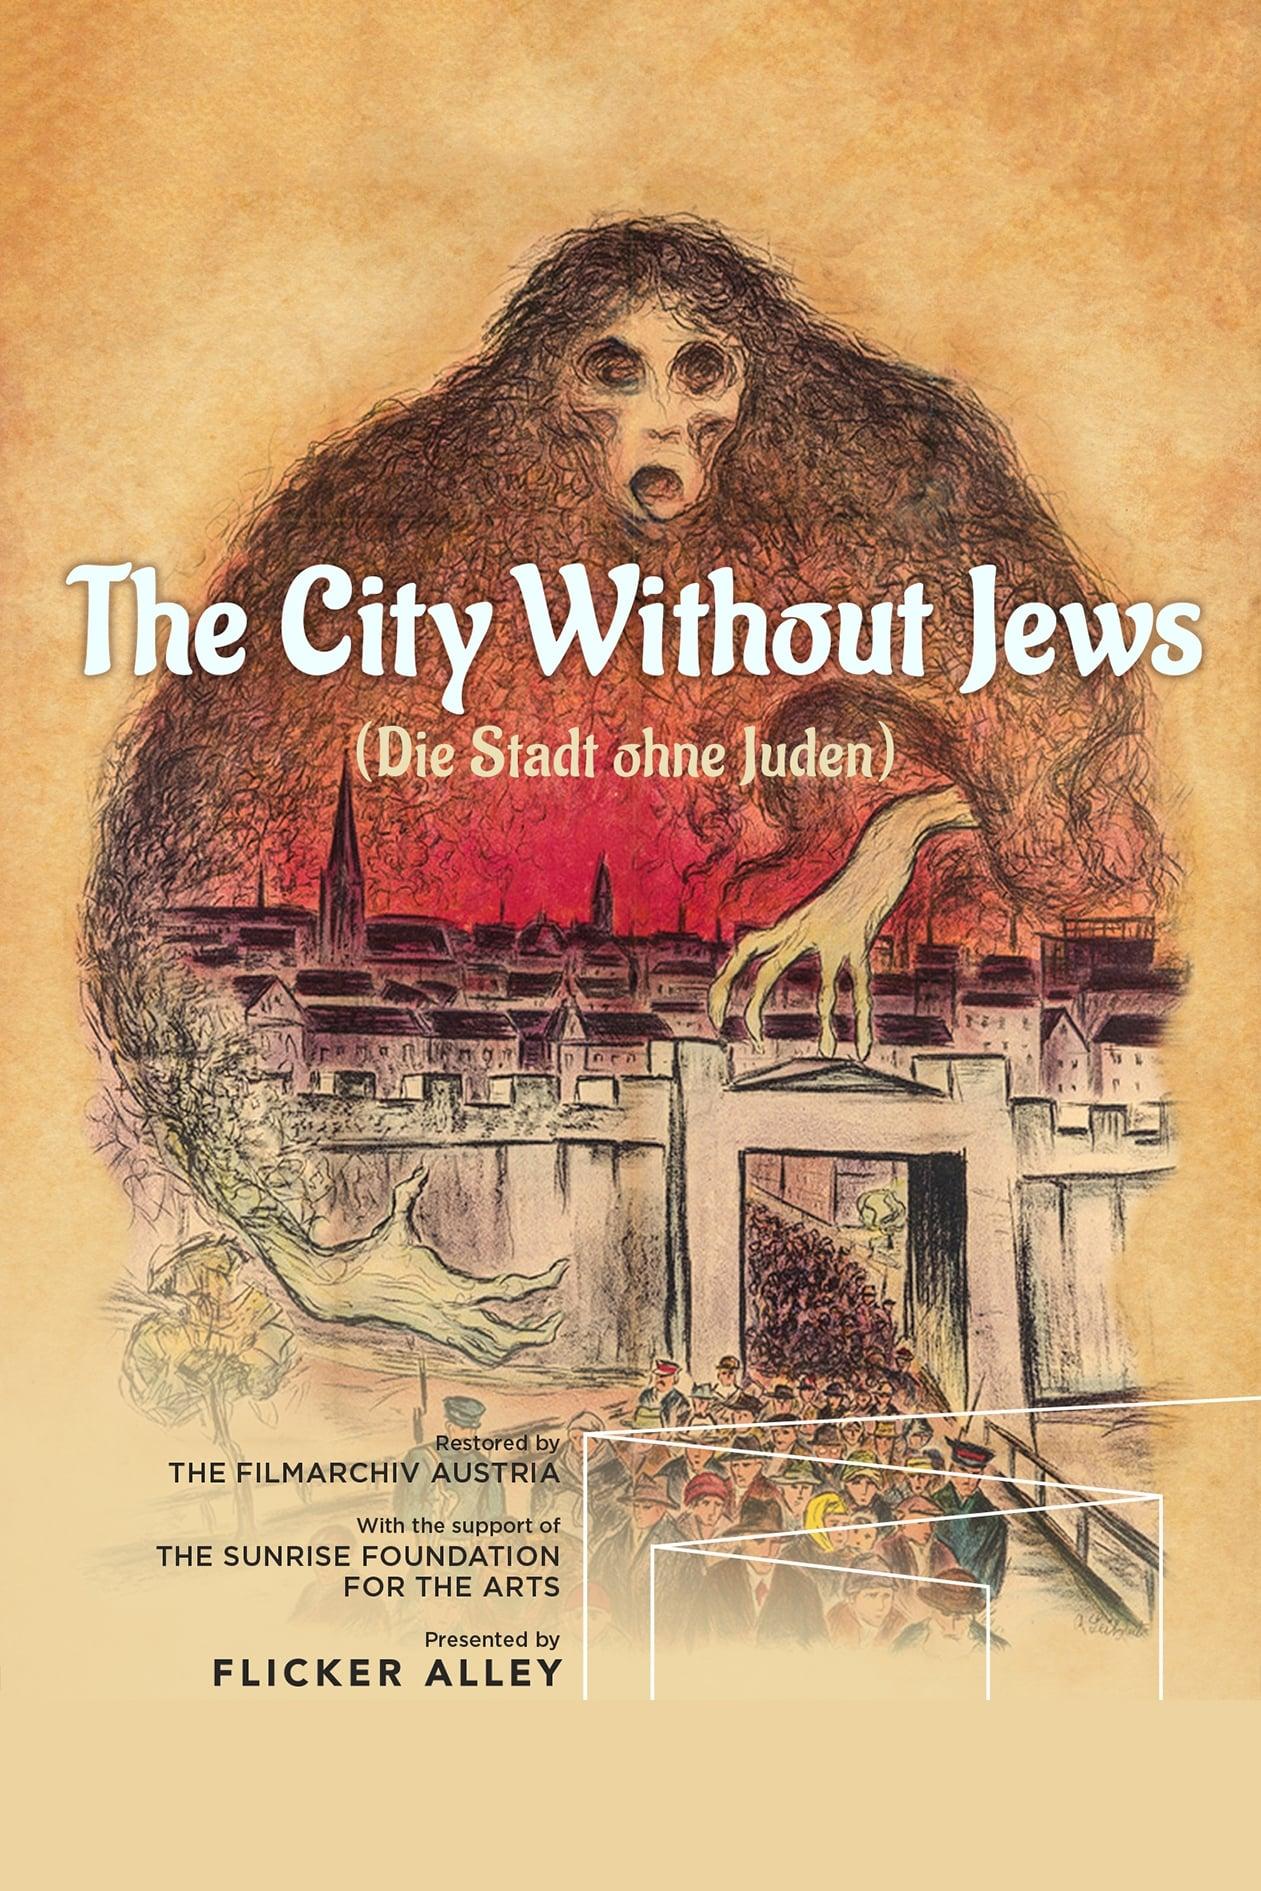 The City Without Jews poster